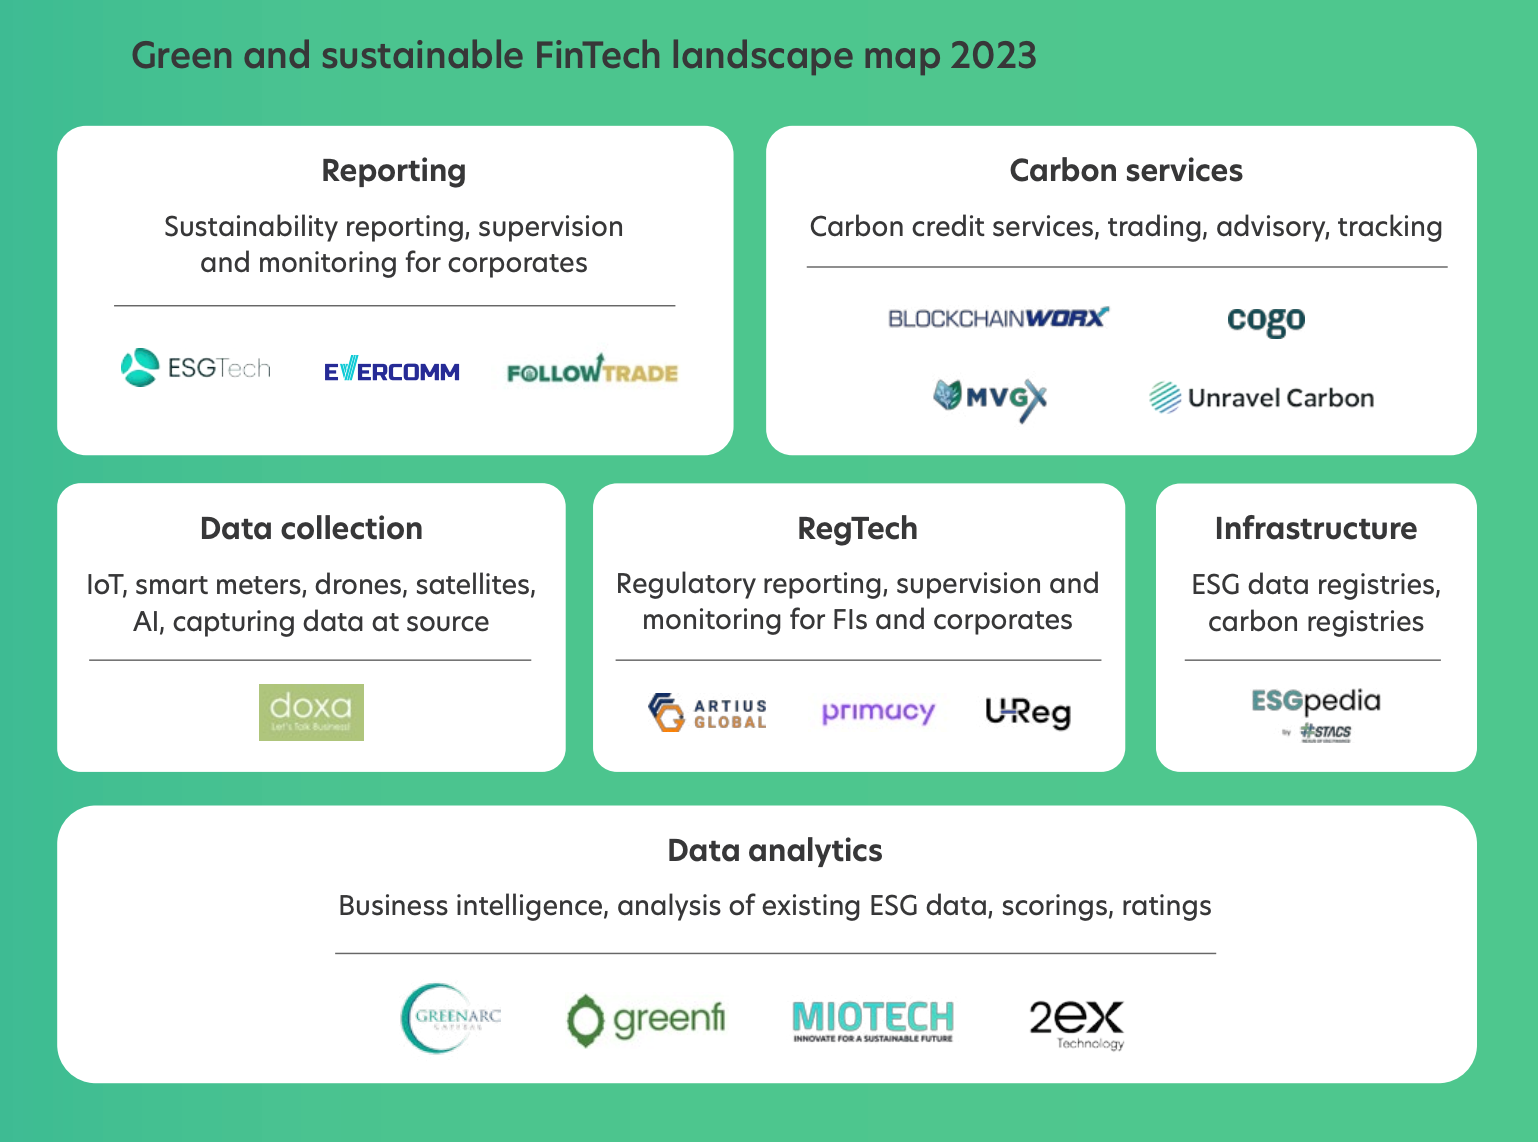 green-and-sustainable-fintech-landscape-map-2023-source-fintech-in-asean-2023-seeding-the-green-transition-uob-pwc-singapore-and-the-singapore-fintech-association-sfa-nov-2023.png